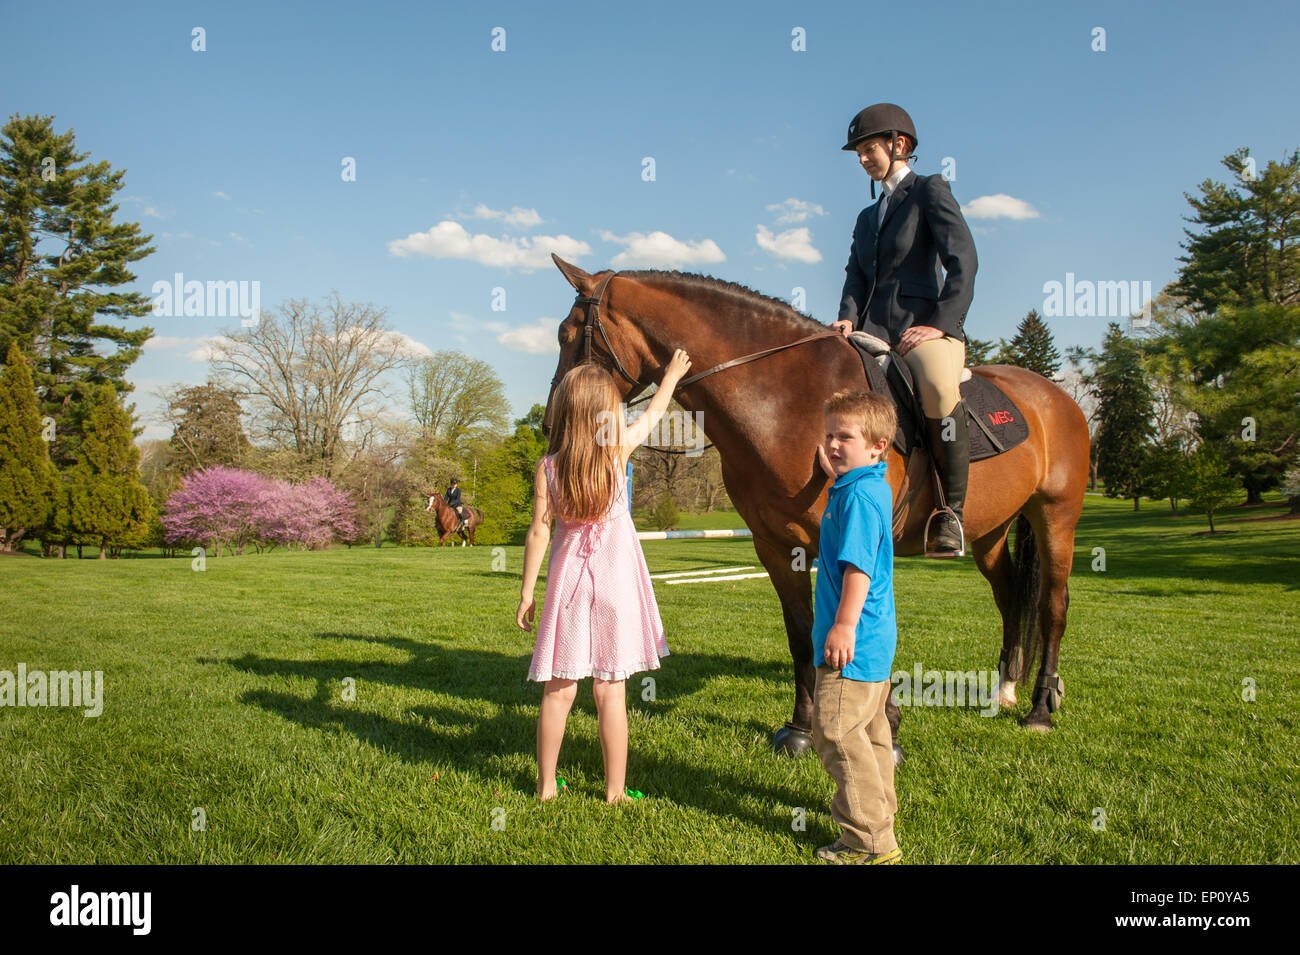 Woman sitting on a horse while a girl and a boy pet the horse in Baltimore County, MD USA Stock Photo